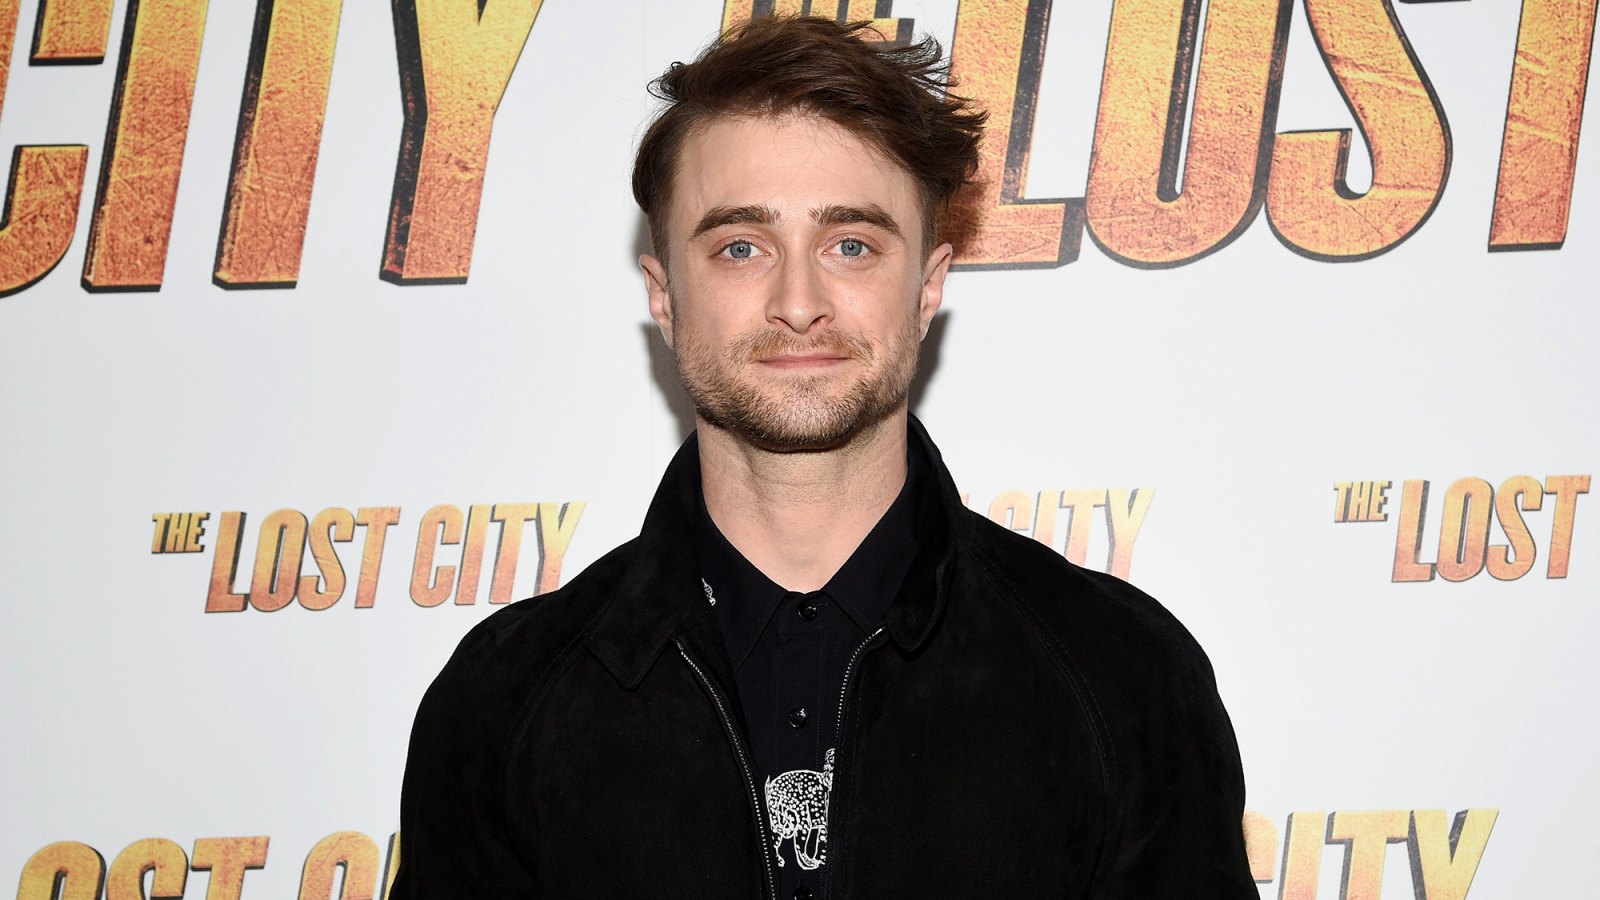 Daniel Radcliffe Says No to Reprising Harry Potter in a ‘Cursed Child’ Movie: I’m Not ‘Really Interested’